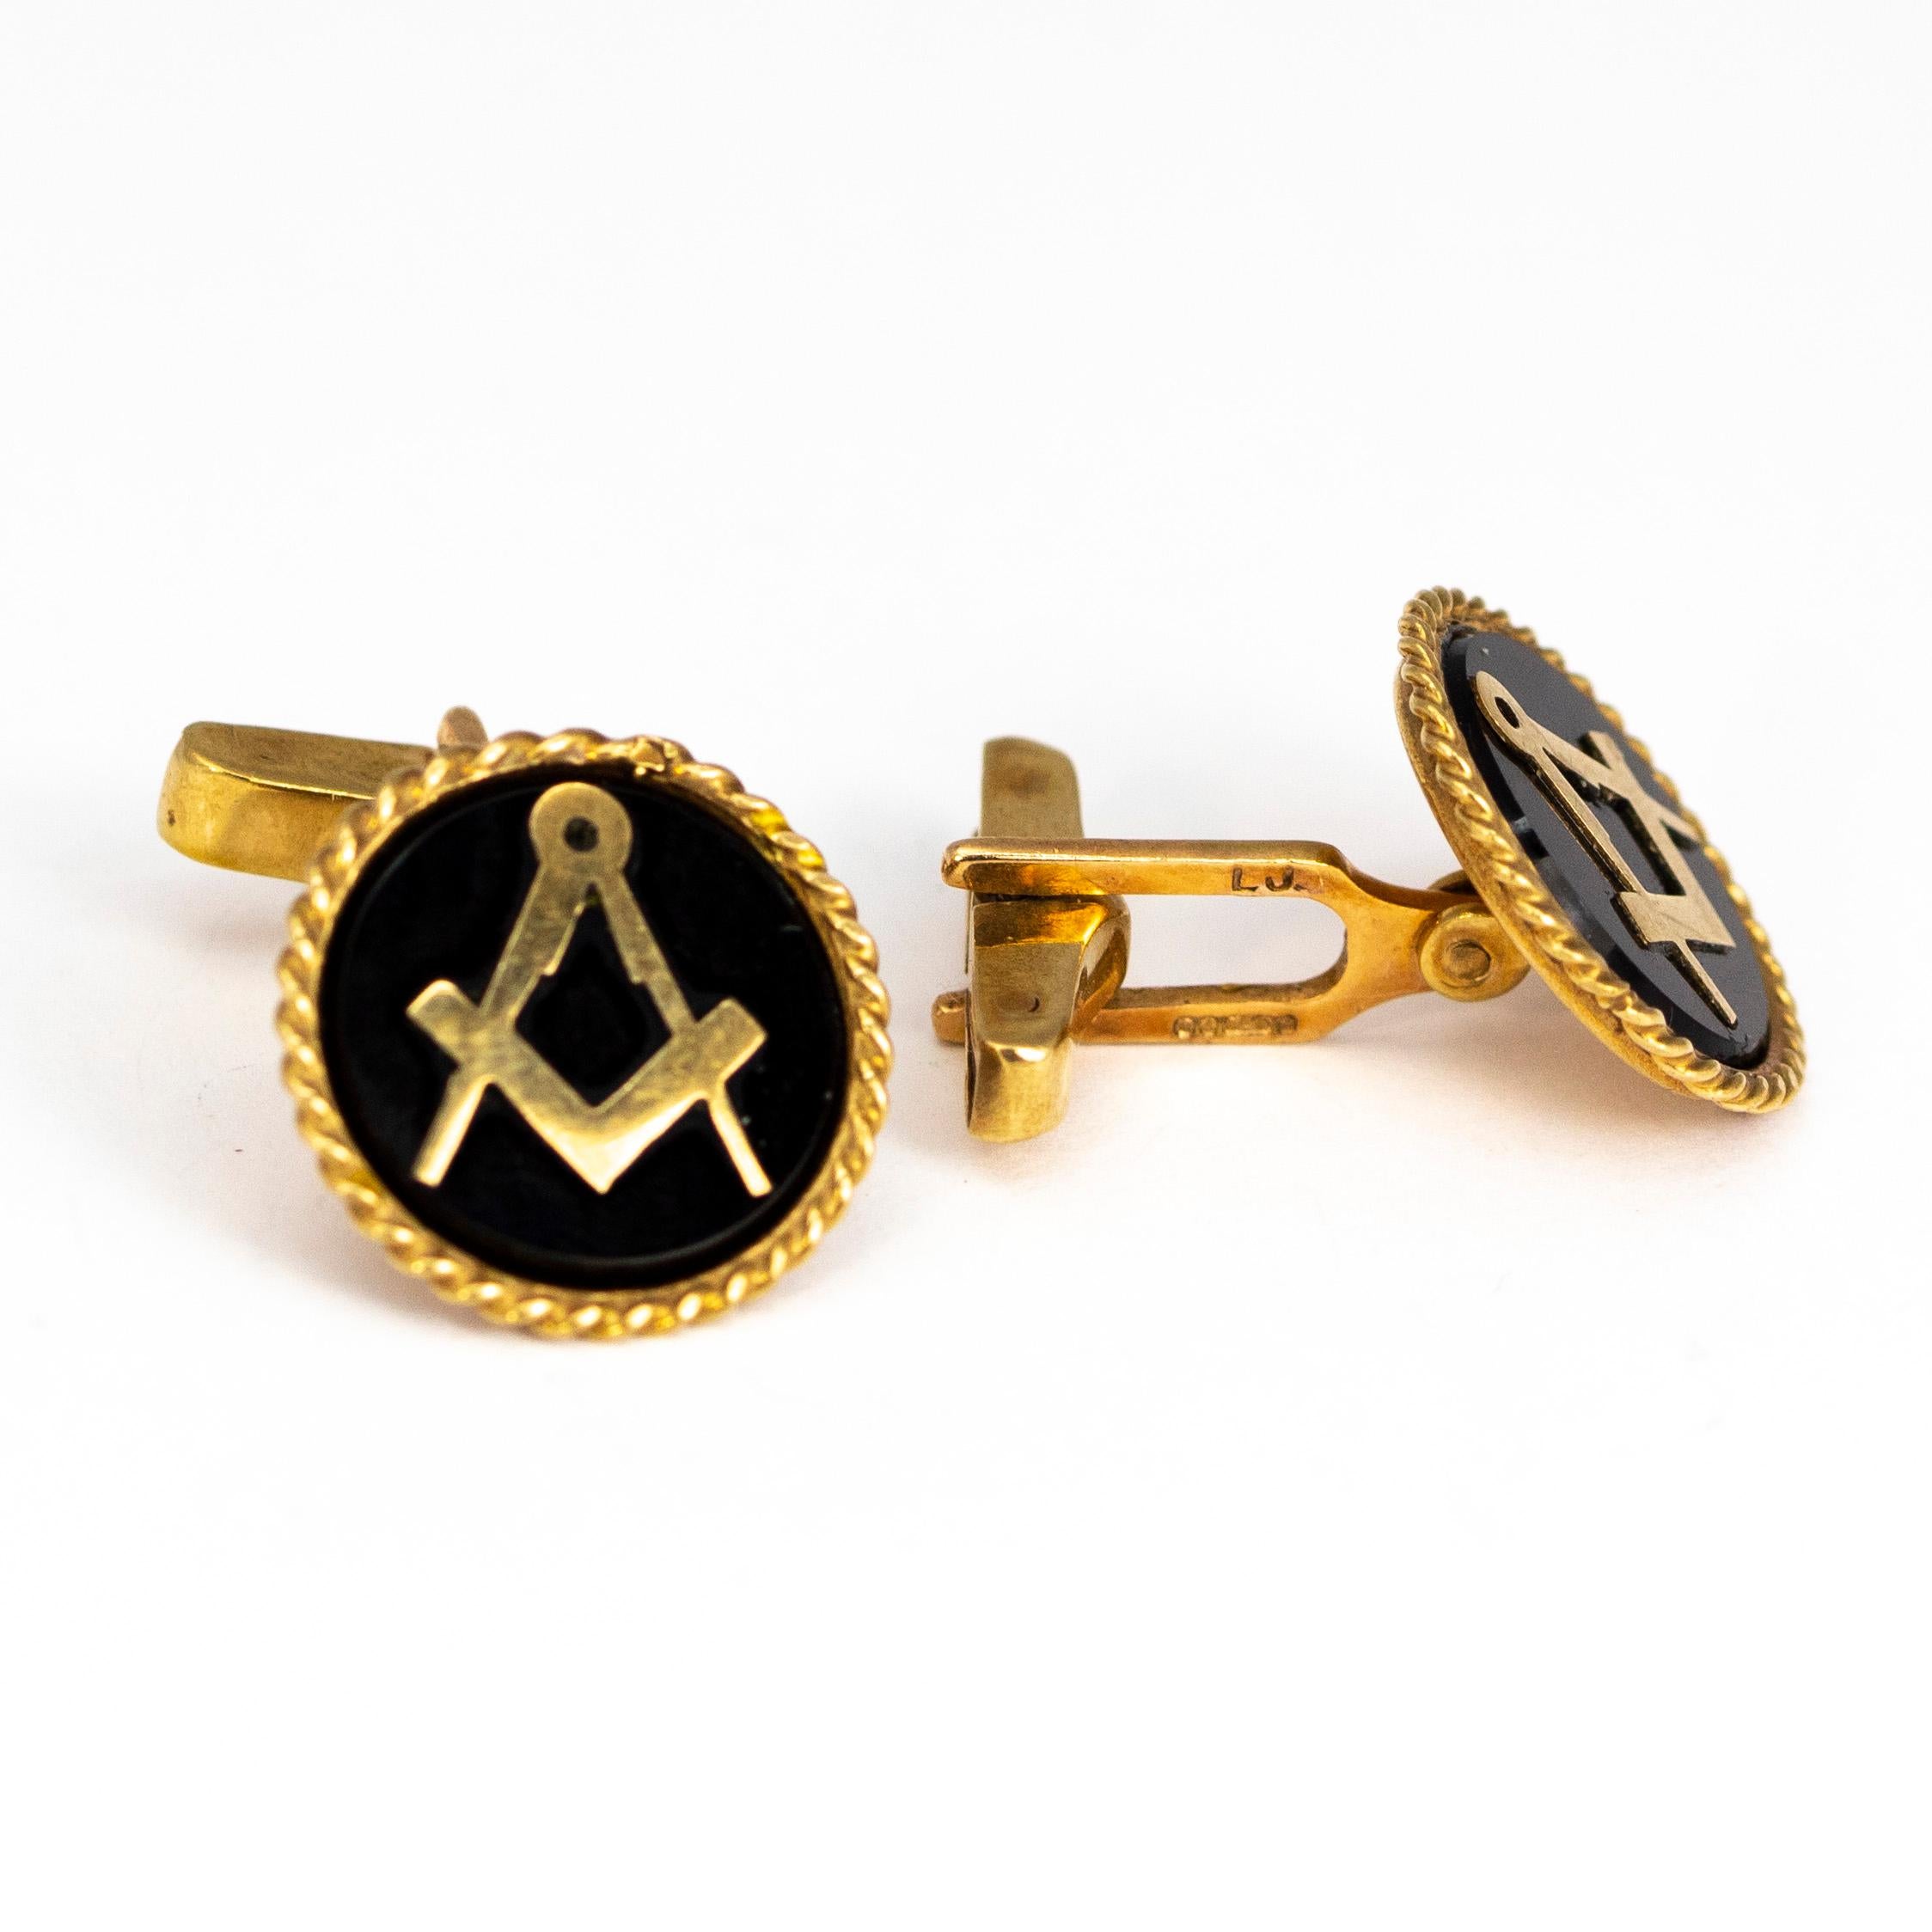 Set with deep glossy onyx, these cuff links have fine gold masonic images on them. The yellow gold used in these are 9ct gold.

Diameter: 18mm

Weight: 8.2g